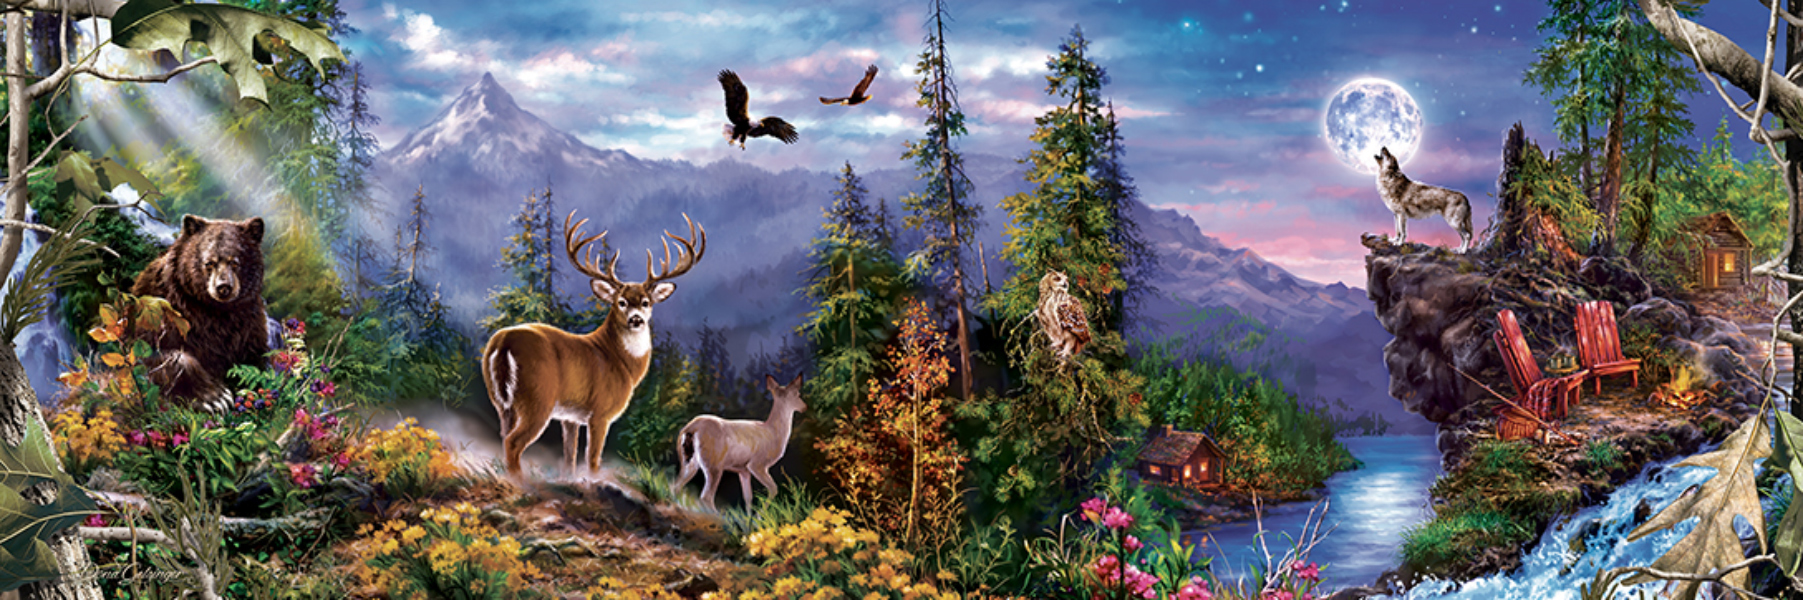 Realtree Forest Animal Jigsaw Puzzle